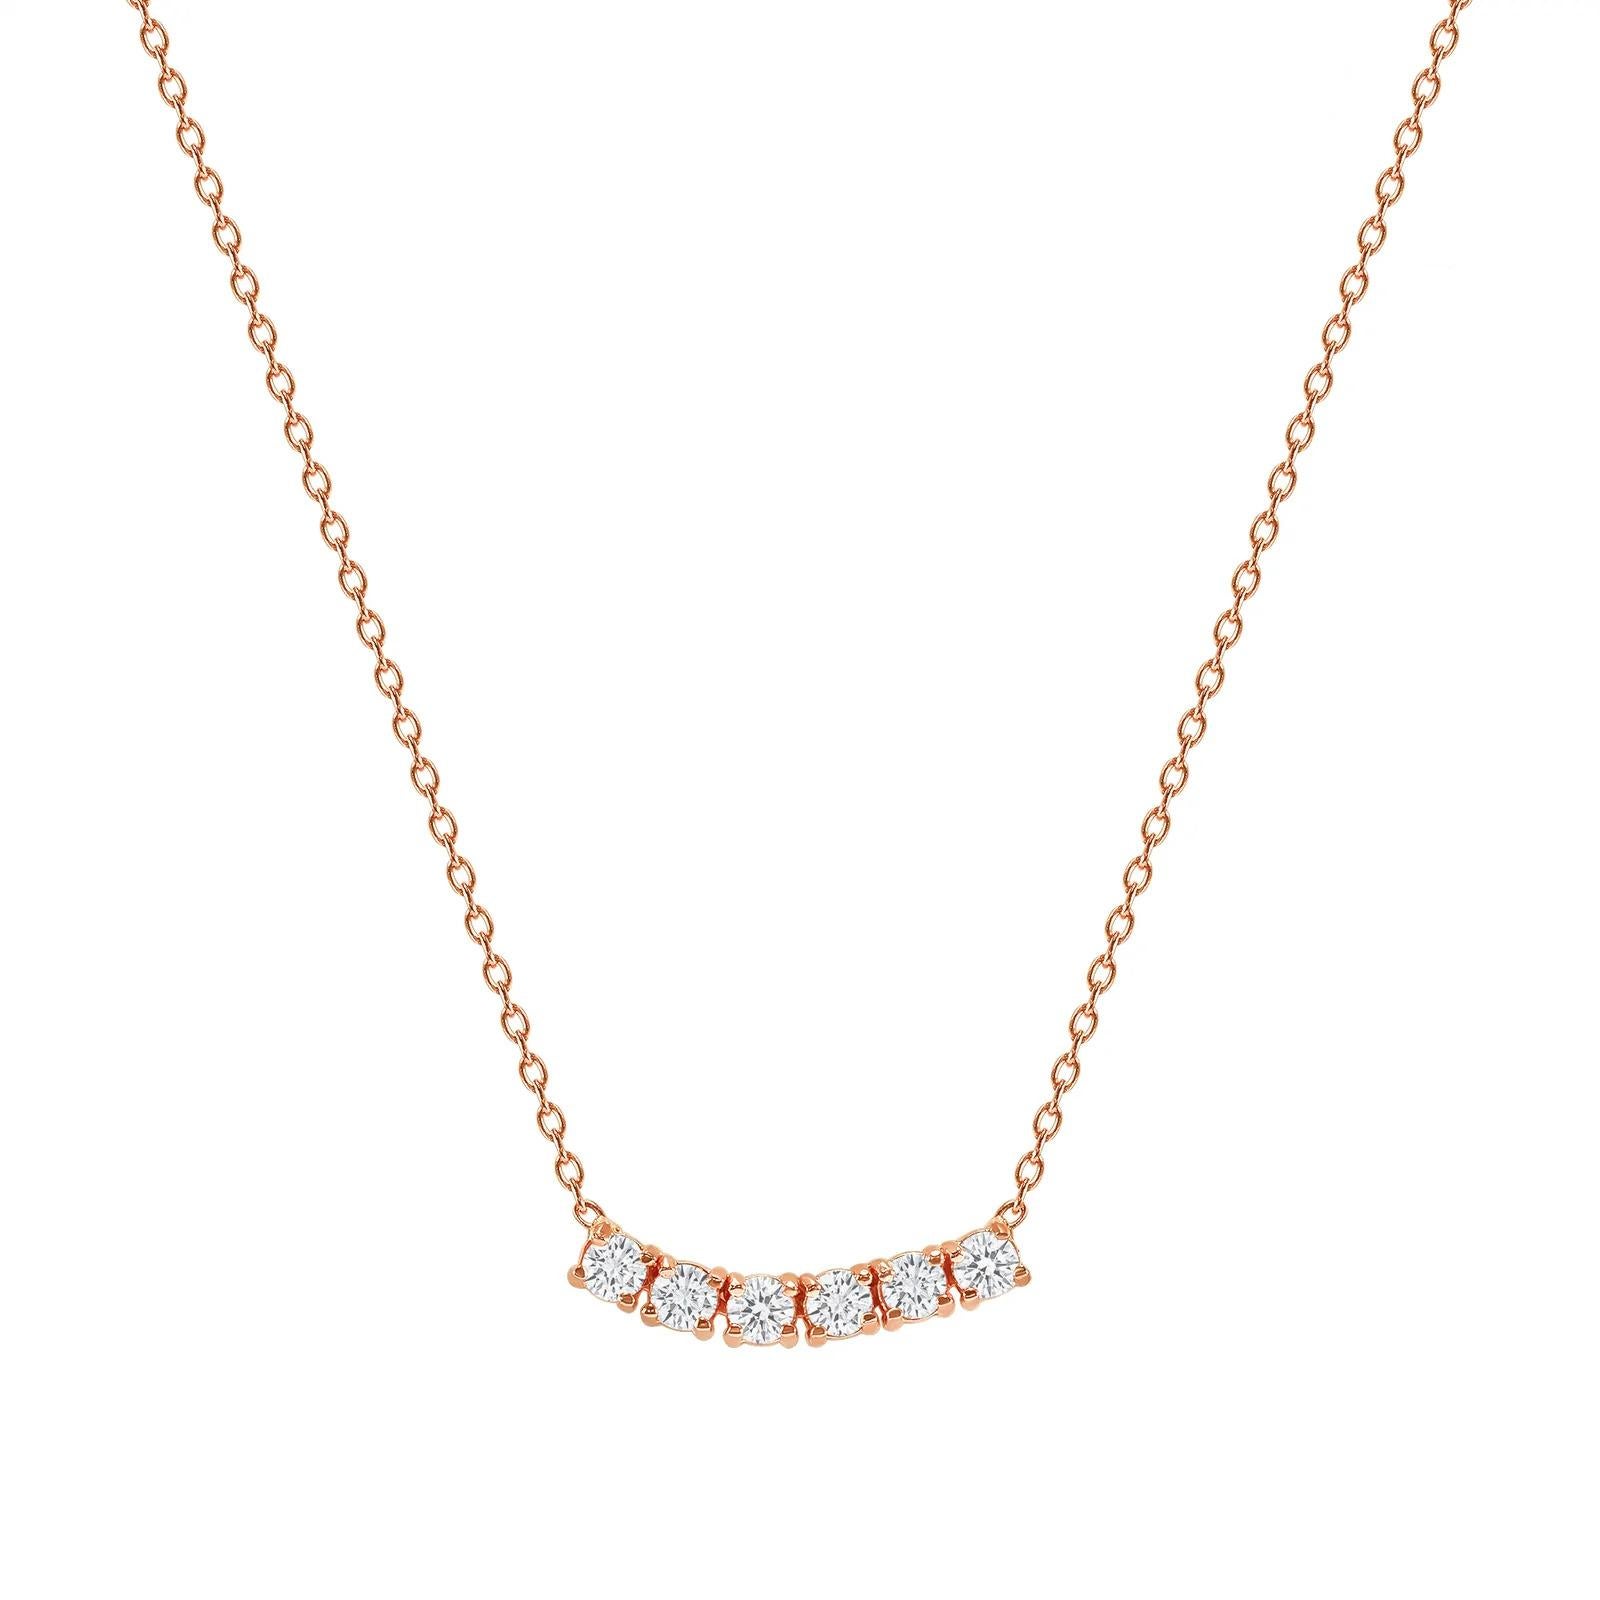 This petite, curved diamond necklace is crafted with gorgeous 14k gold set with six round diamonds.  

Gold: 14k 
Diamond Total Carats: 2 ct
Diamond Cut: Round (6 diamonds)
Diamond Clarity: VS
Diamond Color: F
Color: Rose Gold
Necklace Length: 24